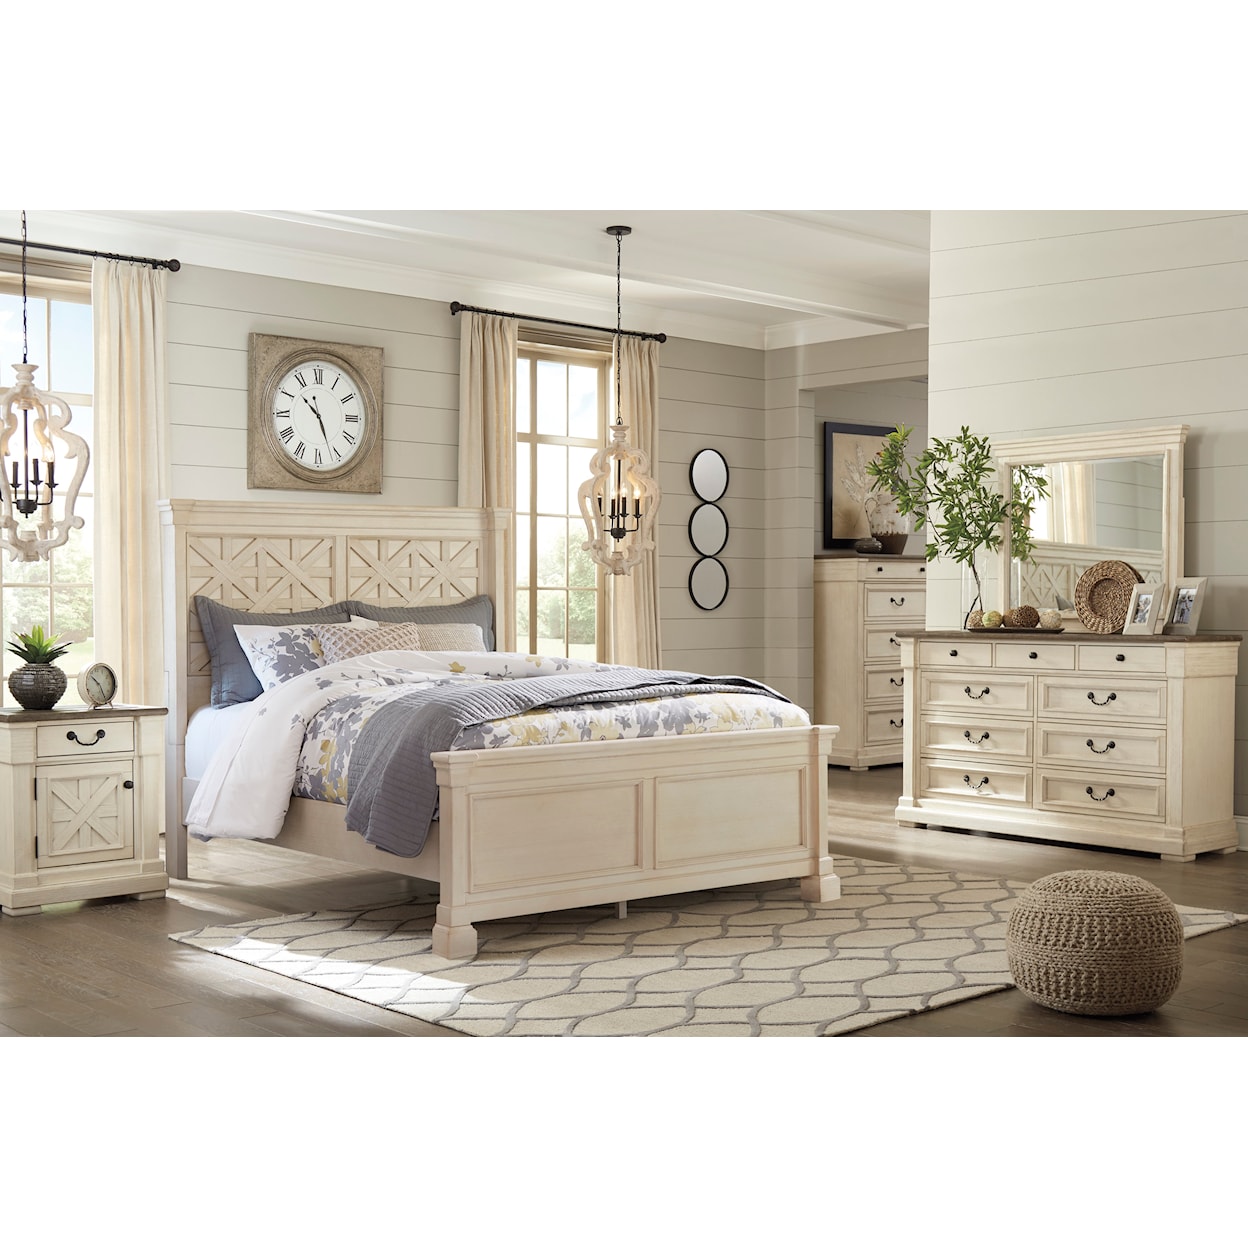 Signature Design by Ashley Bolanburg 6pc Queen Bedroom Group